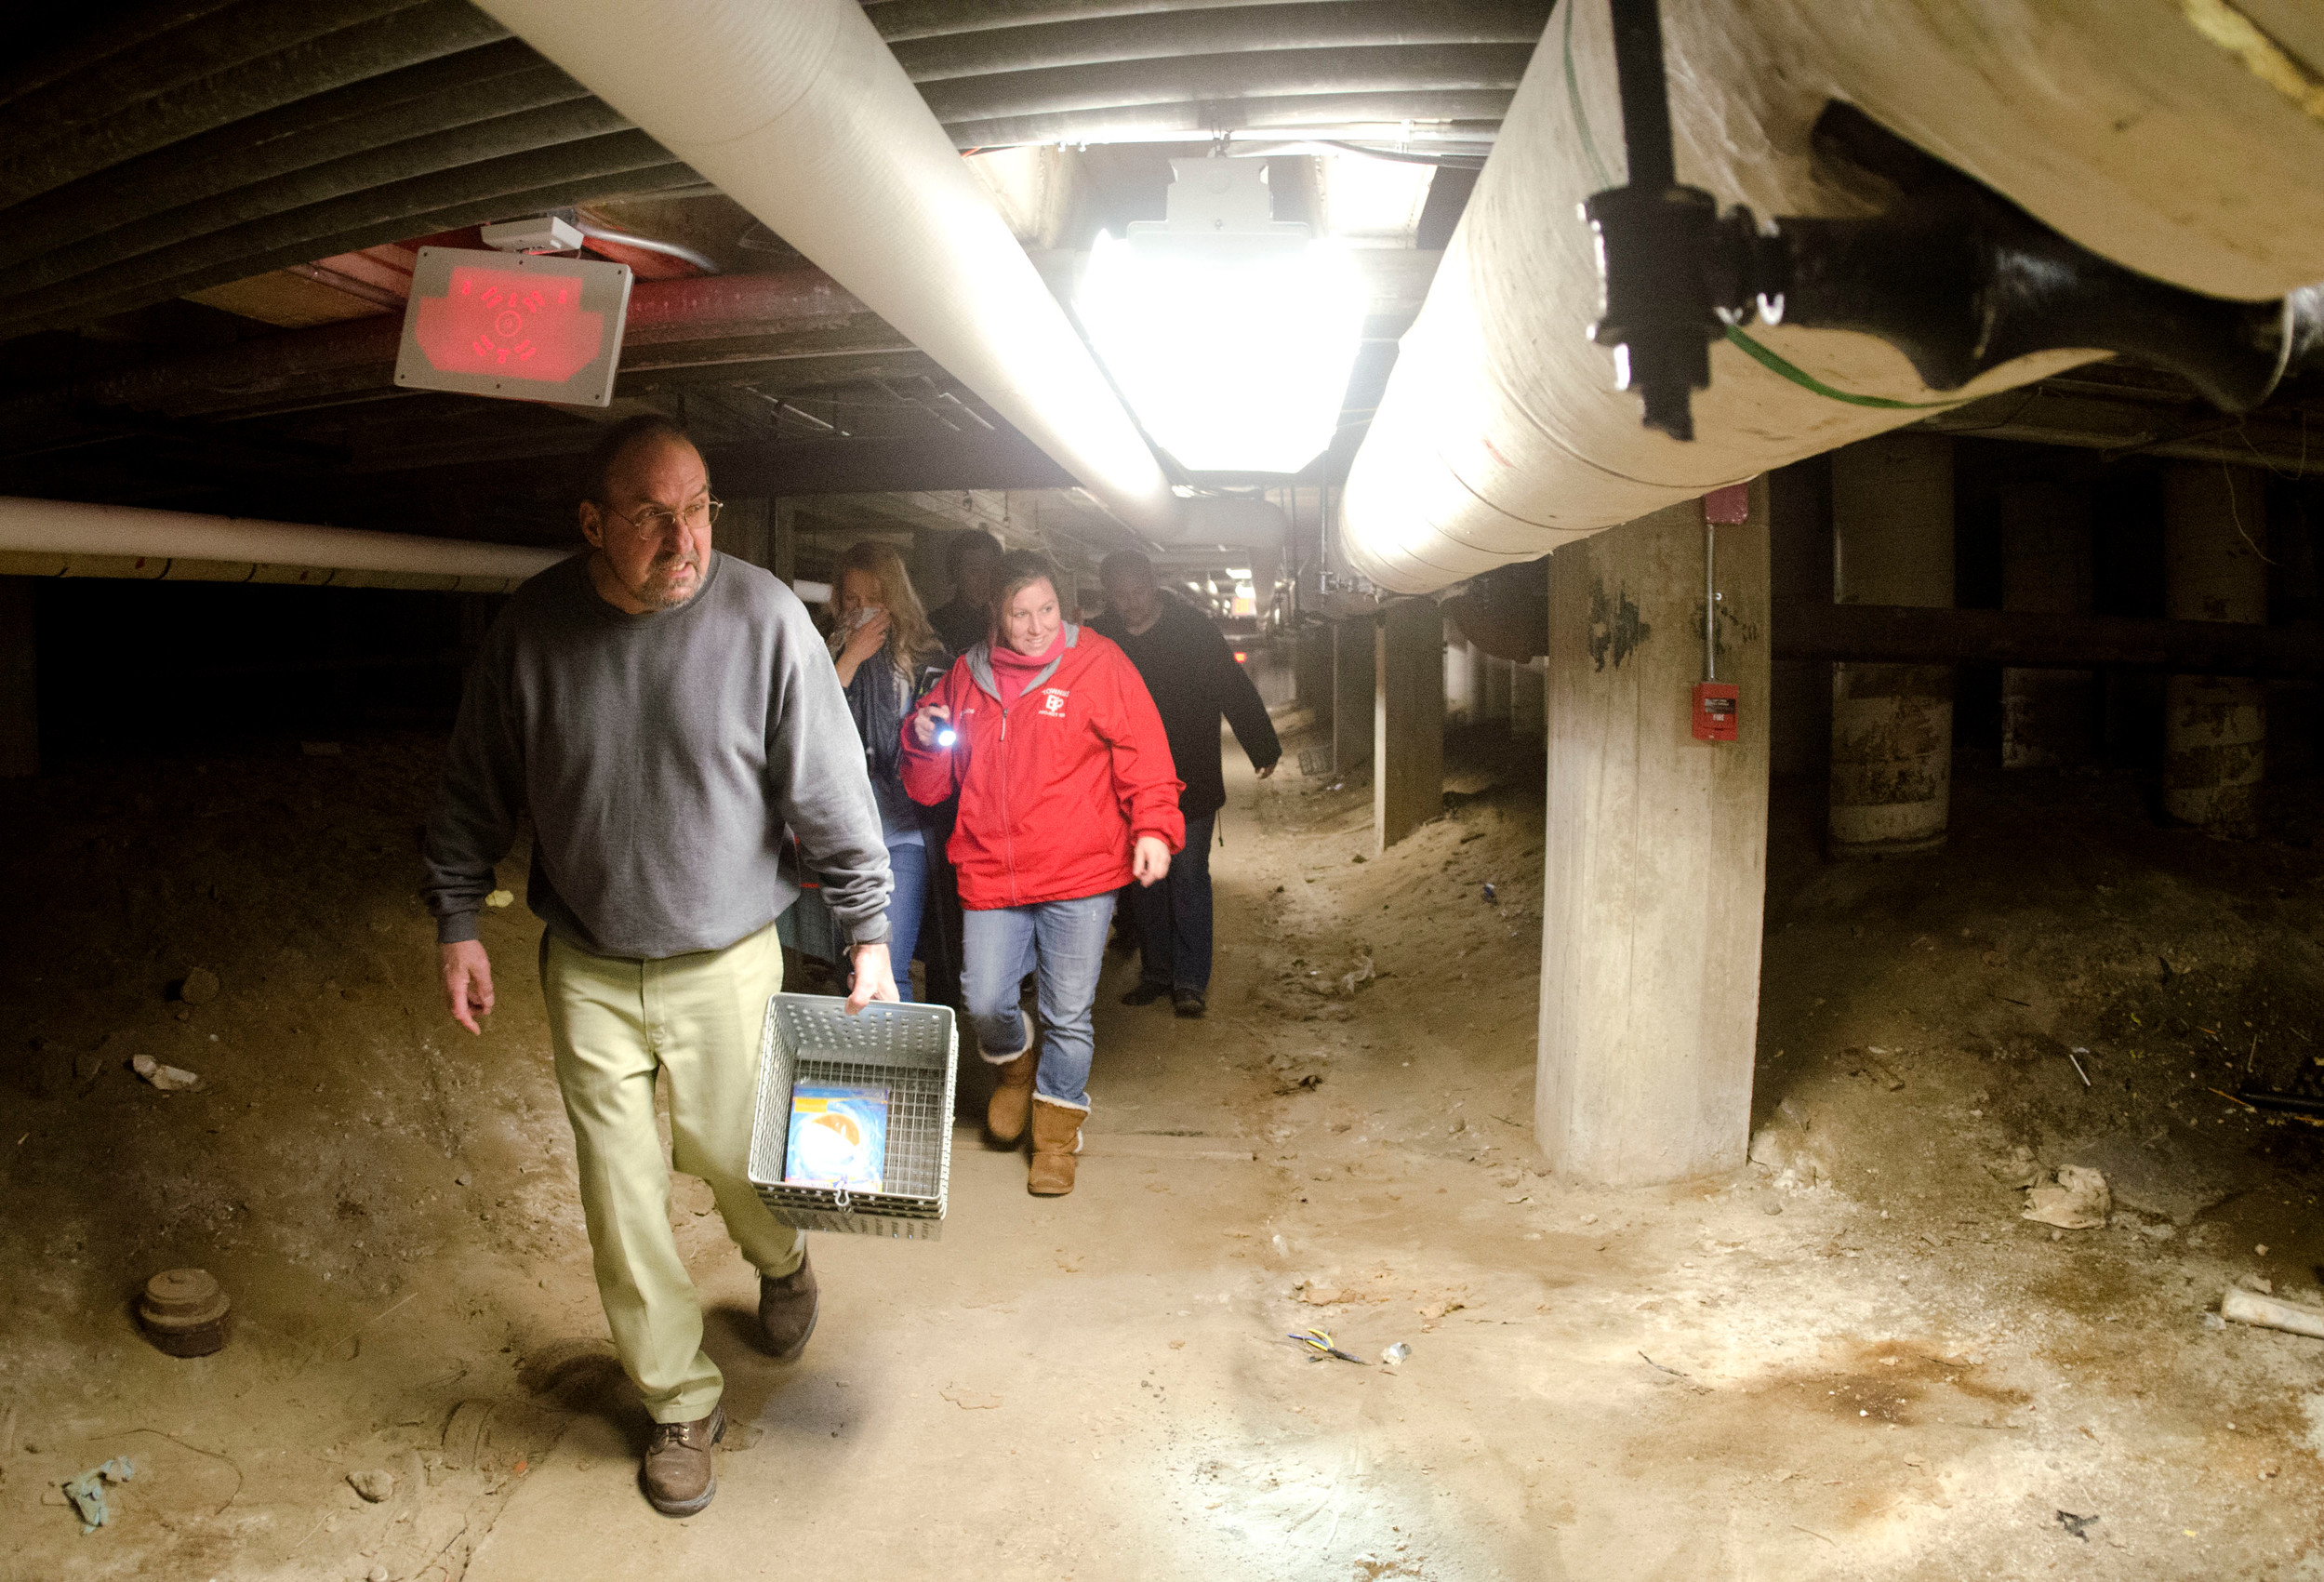 School committee members Anthony Ferreira and Jessica Beauchaine make their way through a dirt path under the 
school leads over to the high school boiler room.